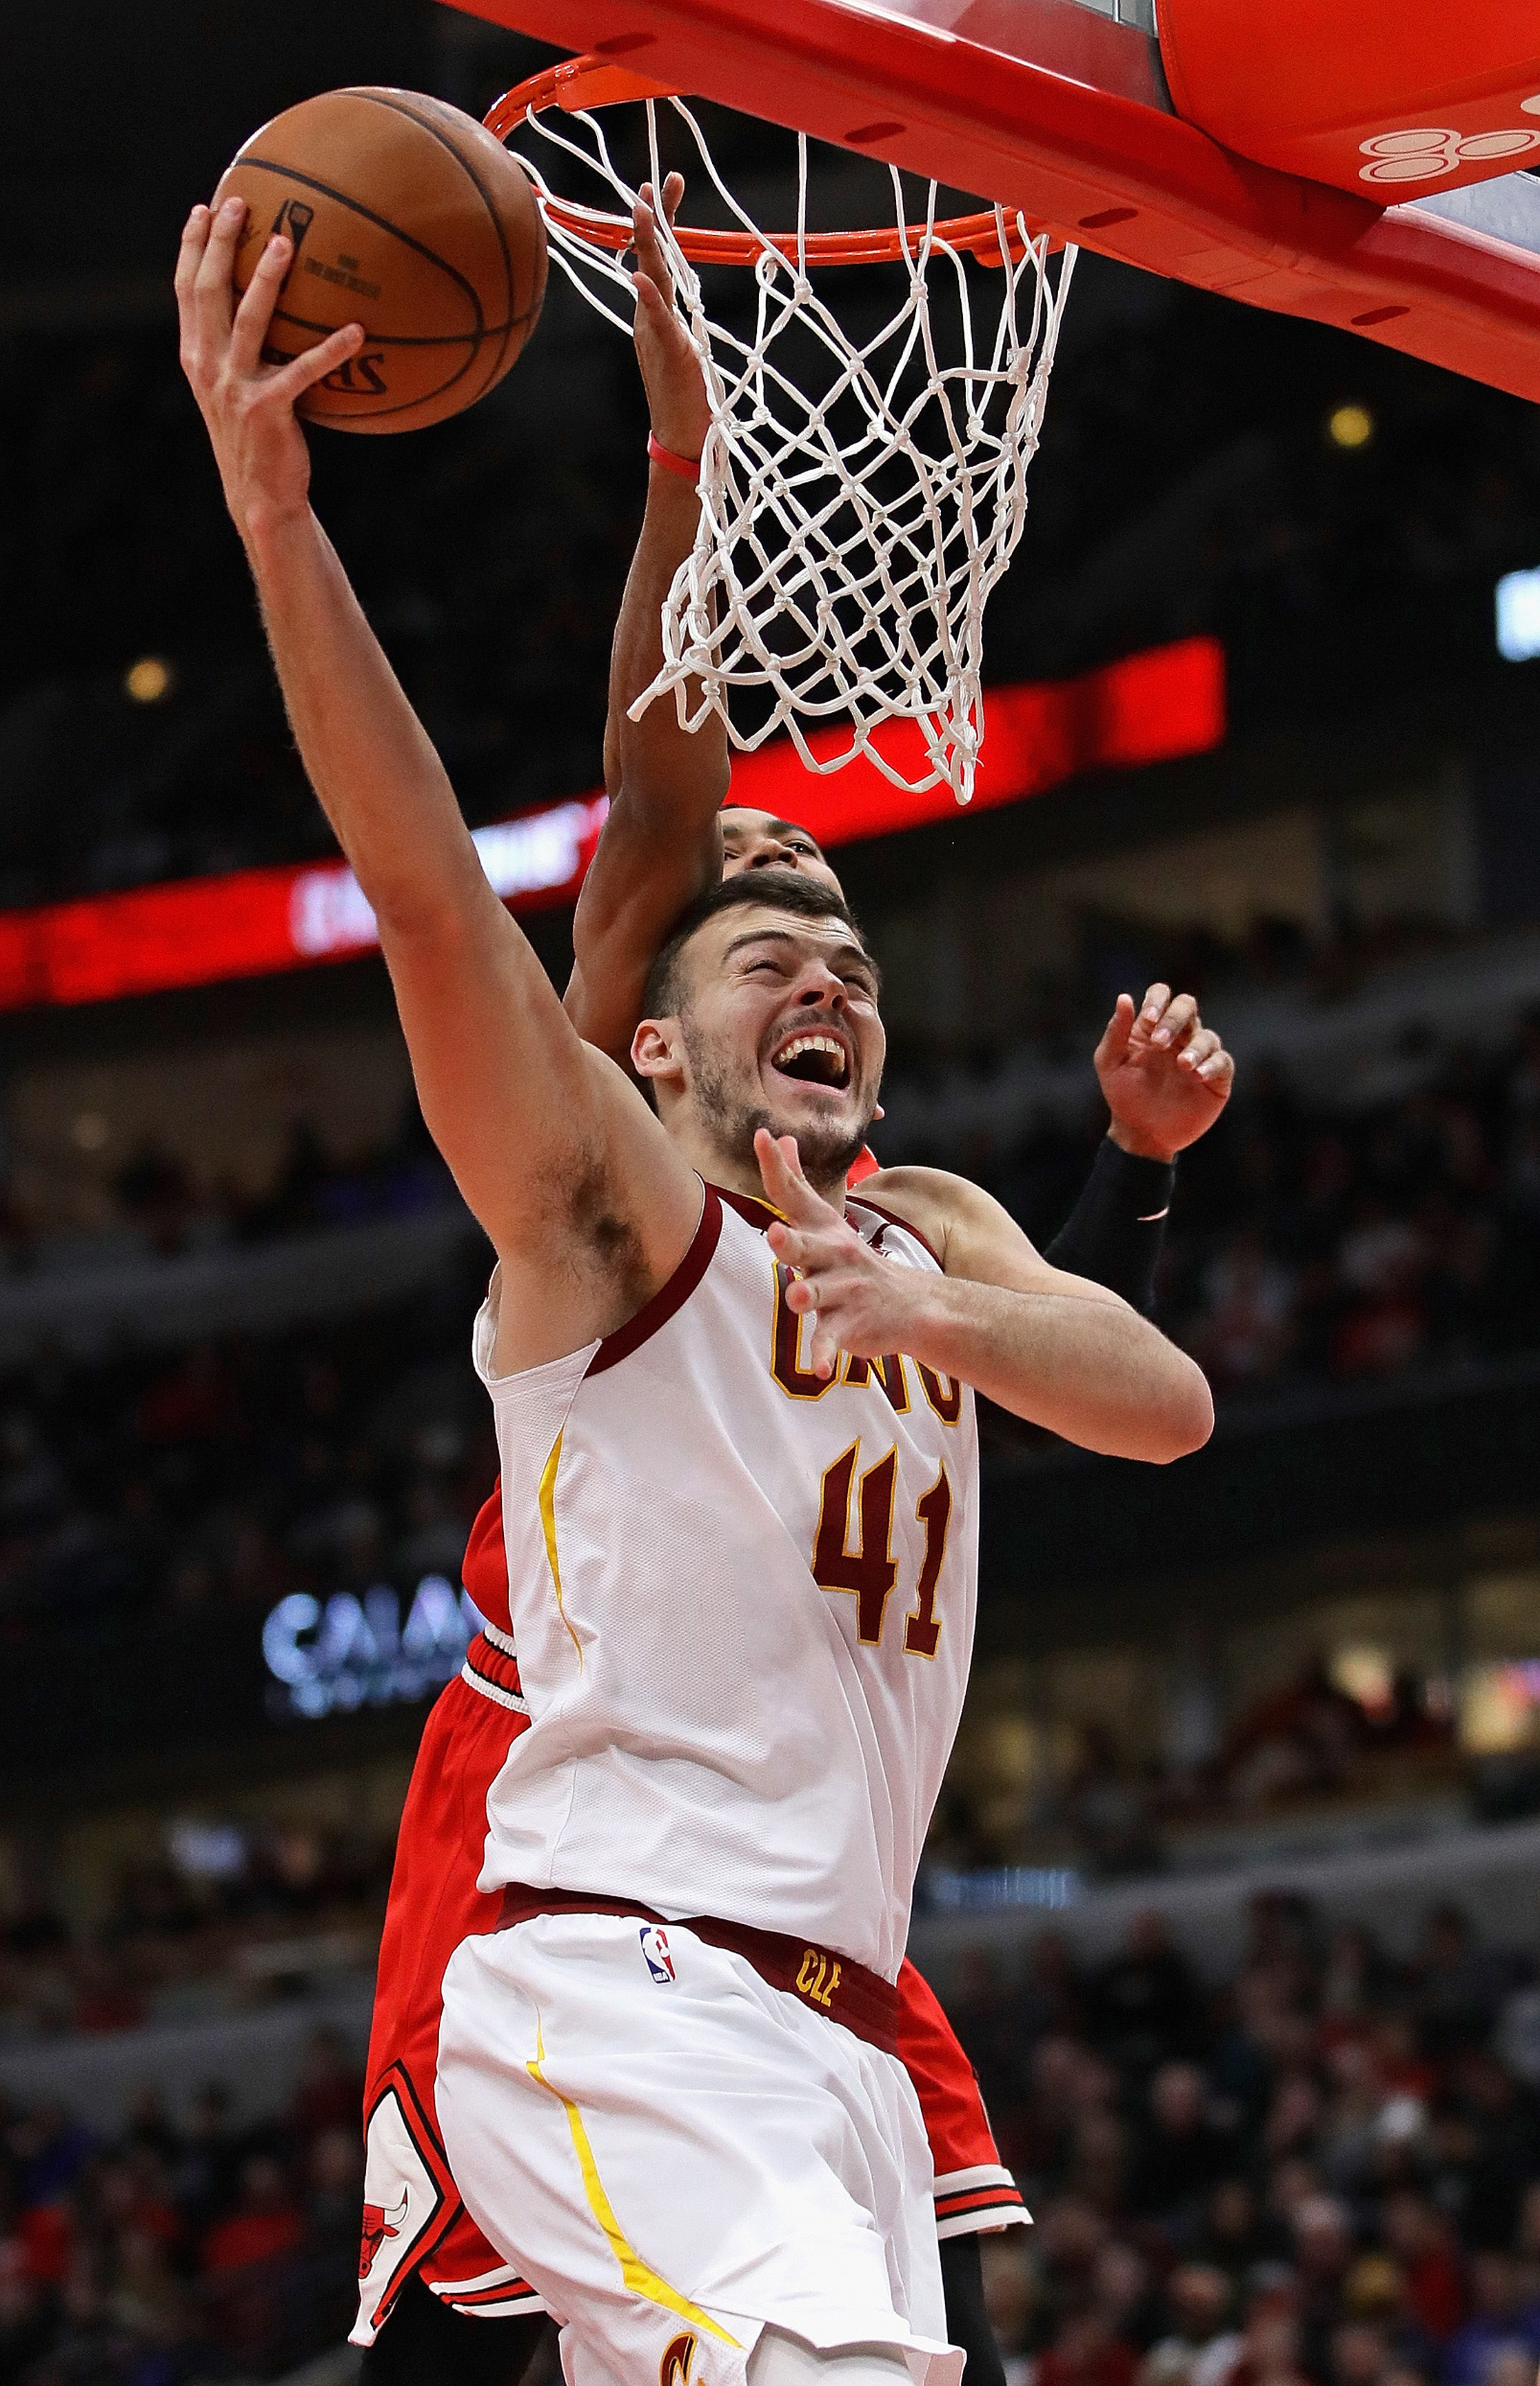 CHICAGO, ILLINOIS - JANUARY 27: Ante Zizic #41 of the Cleveland Cavaliers puts up a shot in front of Shaquille Harrison #3 of the Chicago Bulls at the United Center on January 27, 2019 in Chicago, Illinois. The Cavaliers defeated the Bulls 104-101. NOTE TO USER: User expressly acknowledges and agrees that, by downloading and or using this photograph, User is consenting to the terms and conditions of the Getty Images License Agreement. (Photo by Jonathan Daniel/Getty Images)